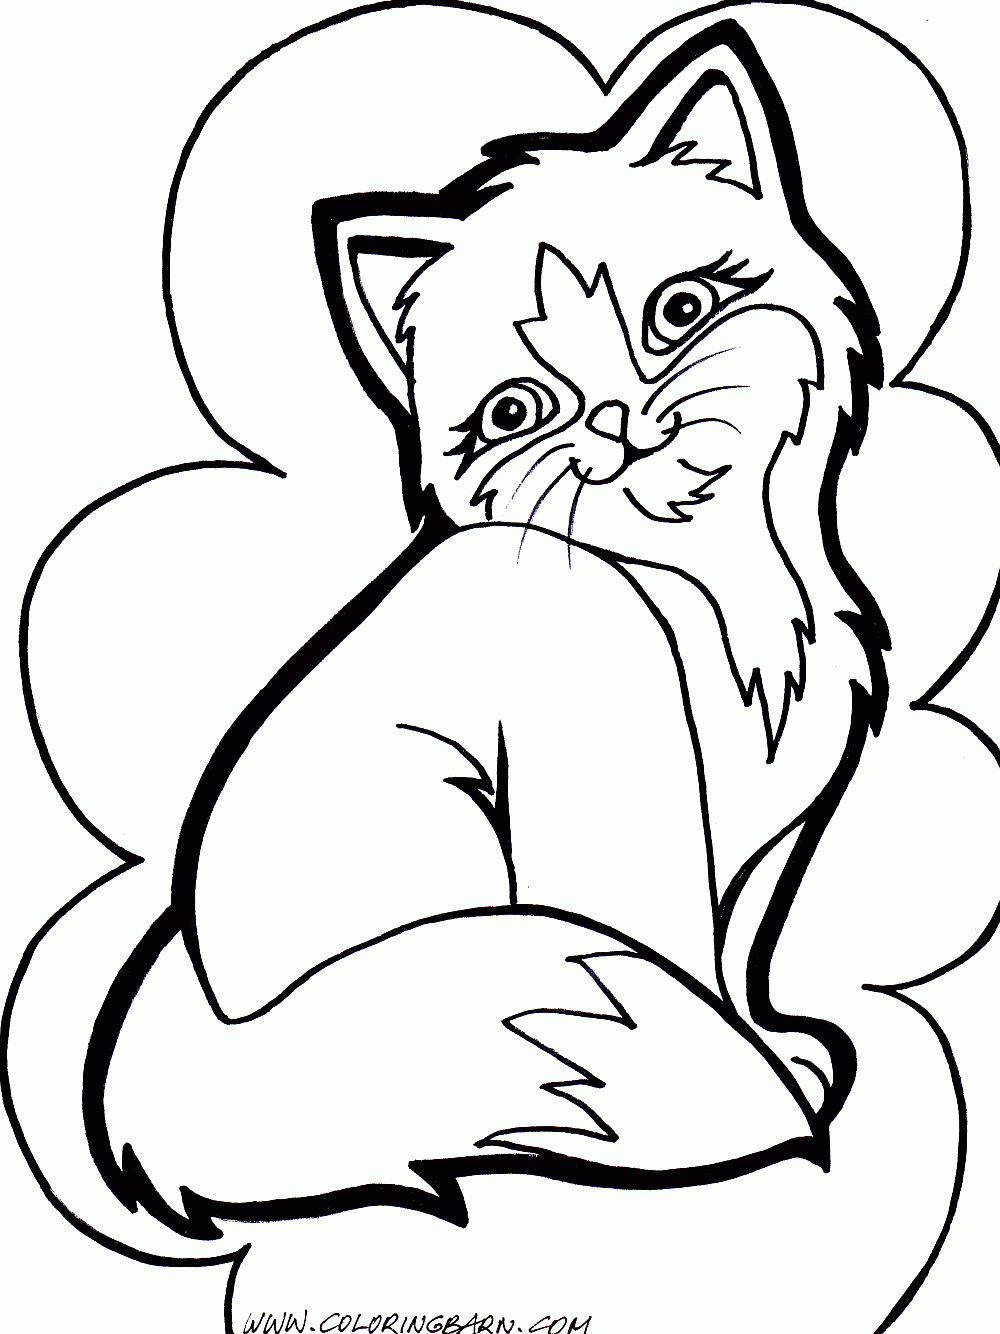 Cat Coloring Page - GetColoringPages.com